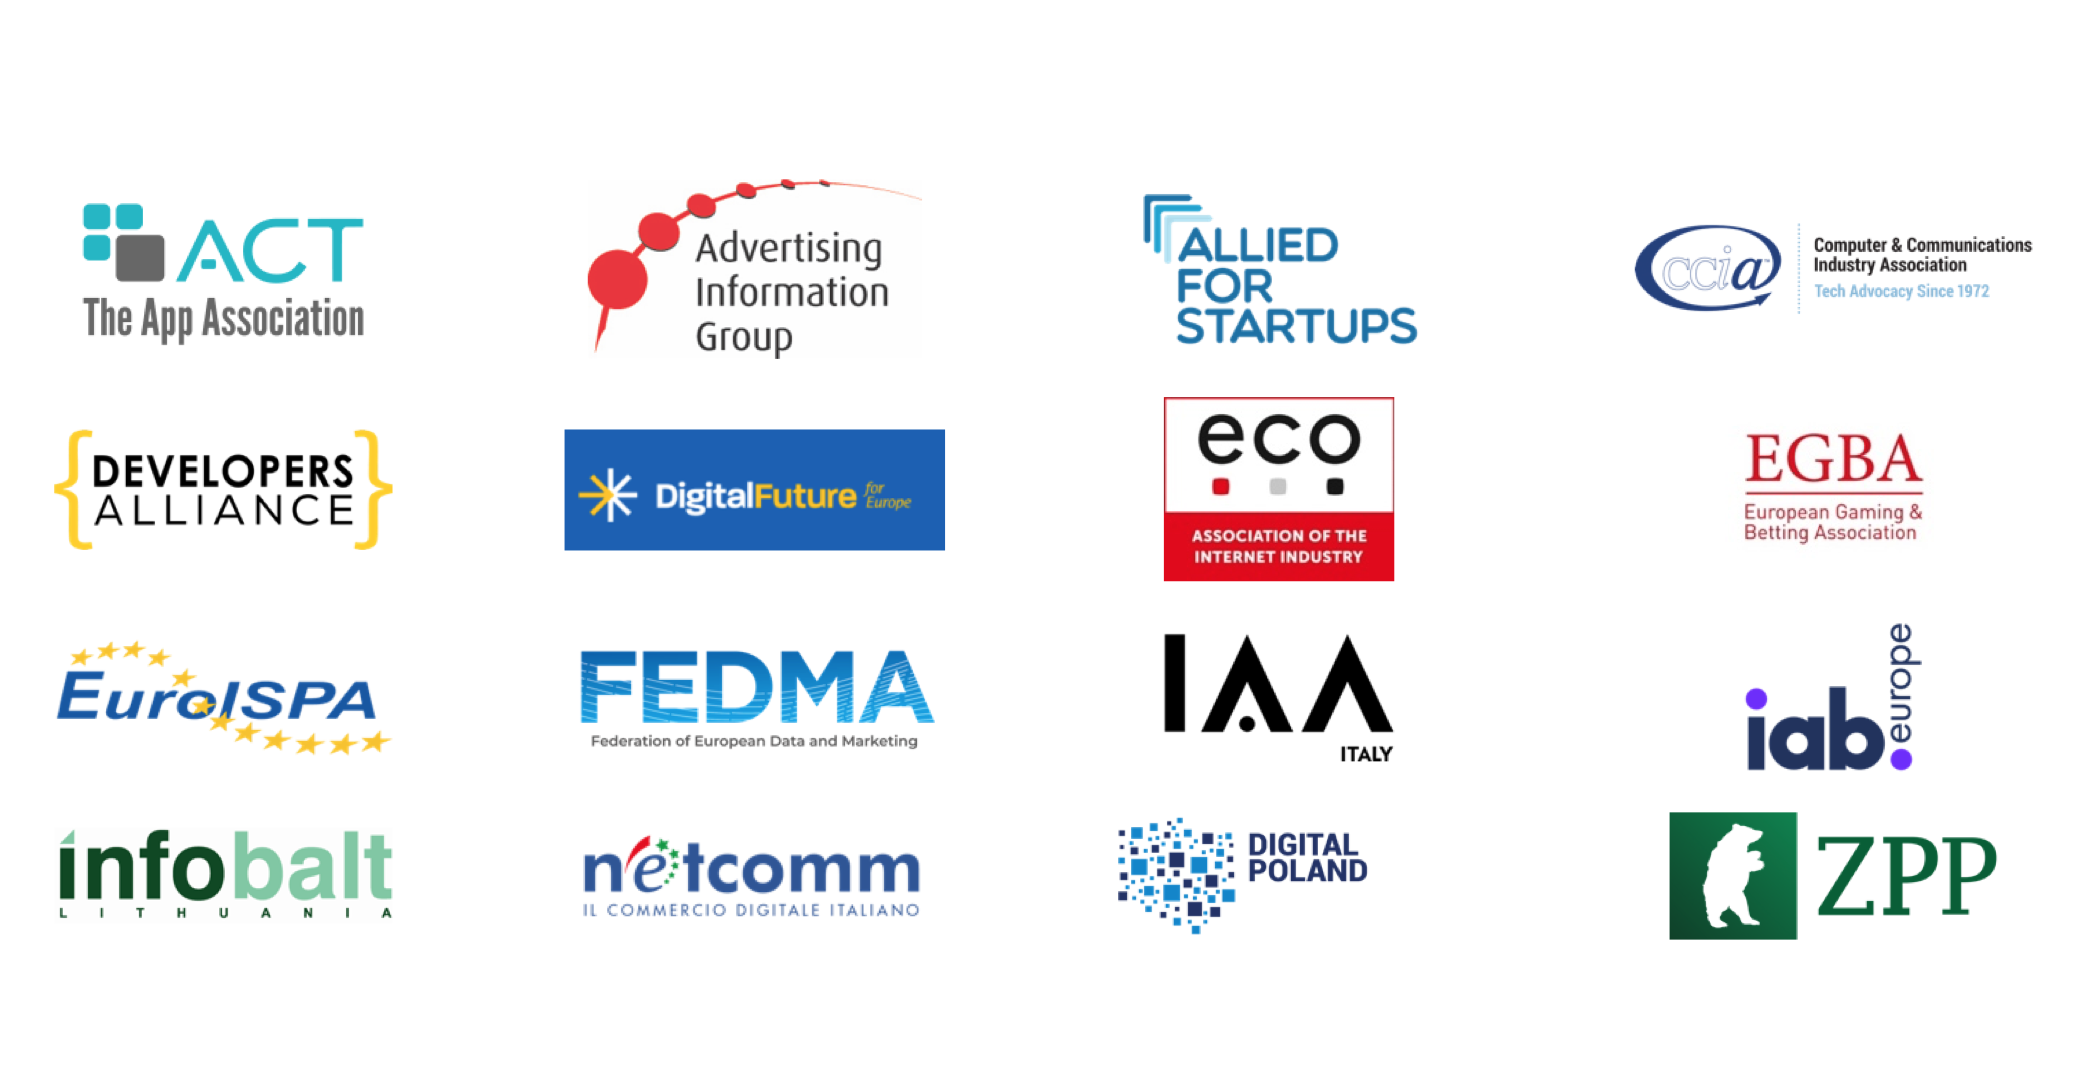 EGBA joins other leading trade associations to call for a workable, balanced, and future-proof EU Digital Services Act